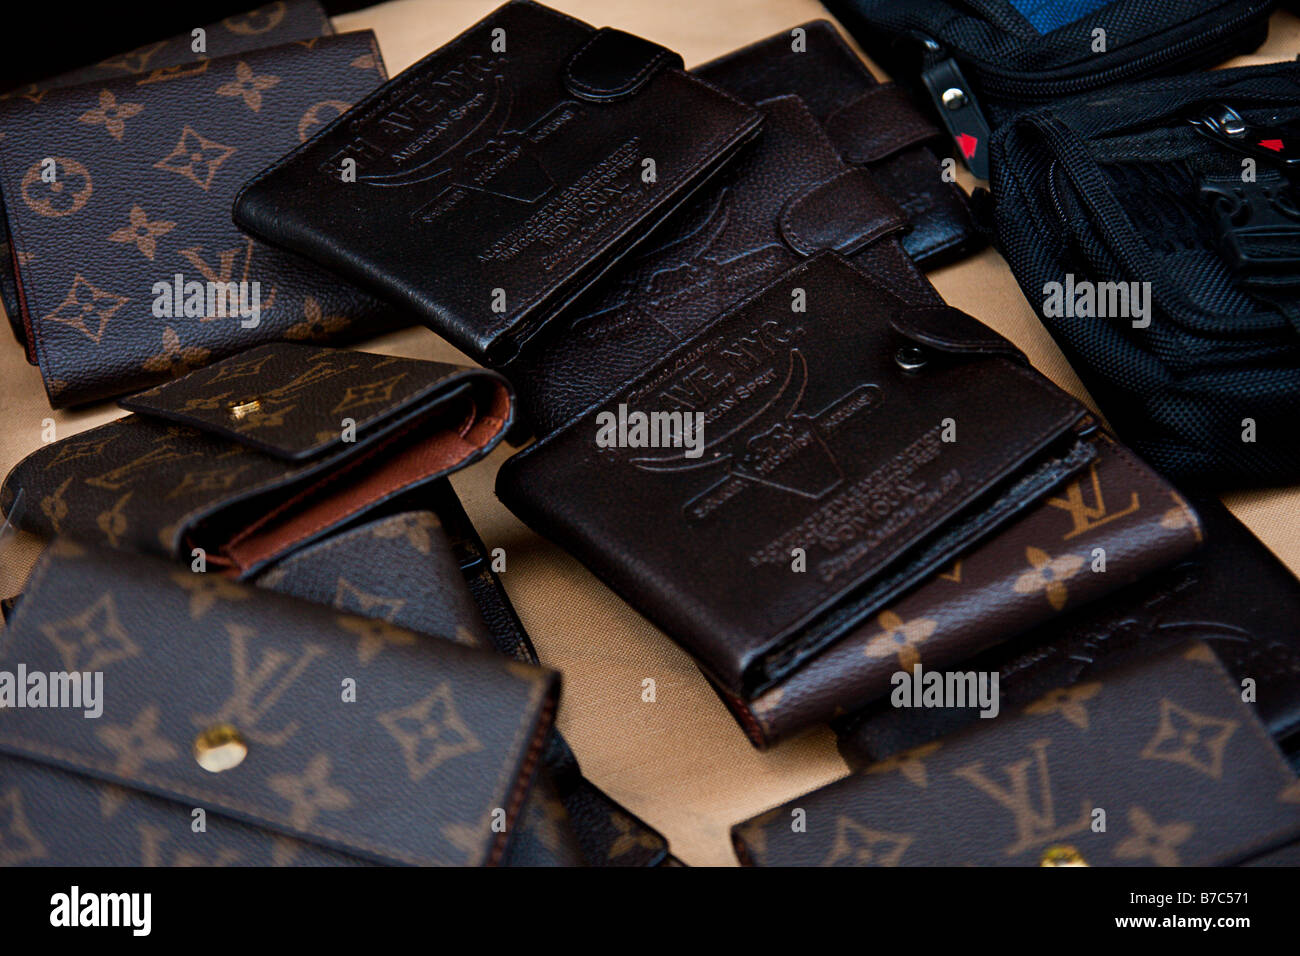 Counterfeit leather wallets sold at a store in Nicosia Cyprus